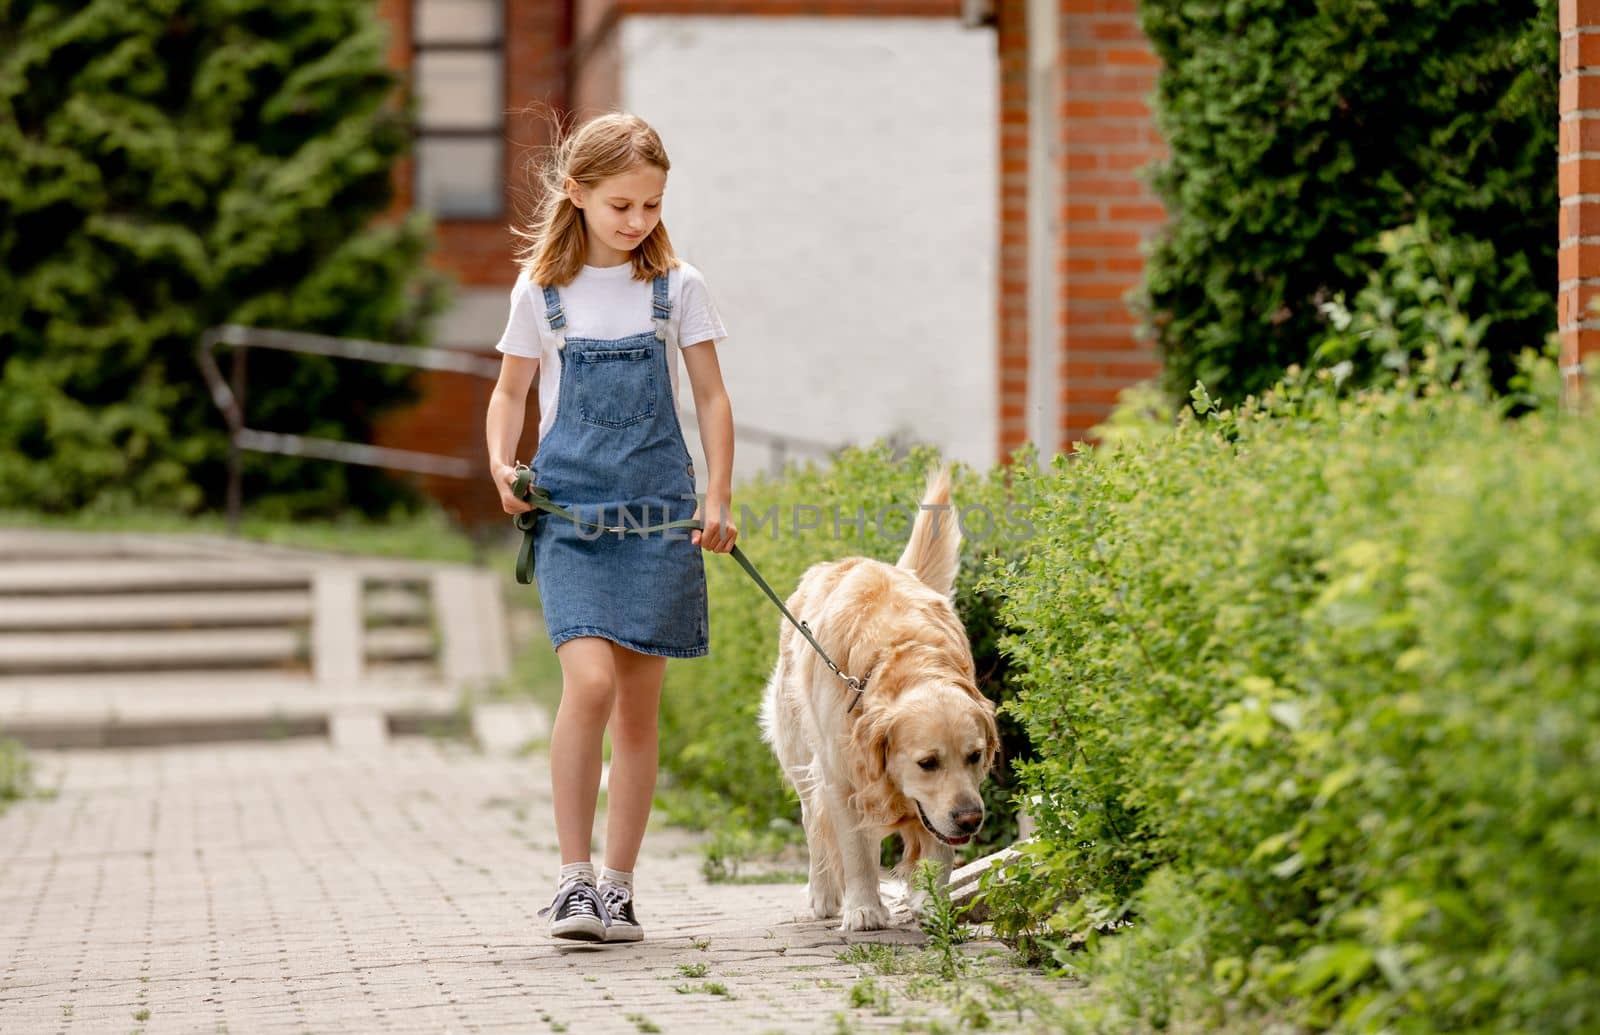 Preteen girl wearing jeans dress with golden retriever dog walking outdoors in summertime. Pretty kid petting fluffy doggy pet in city